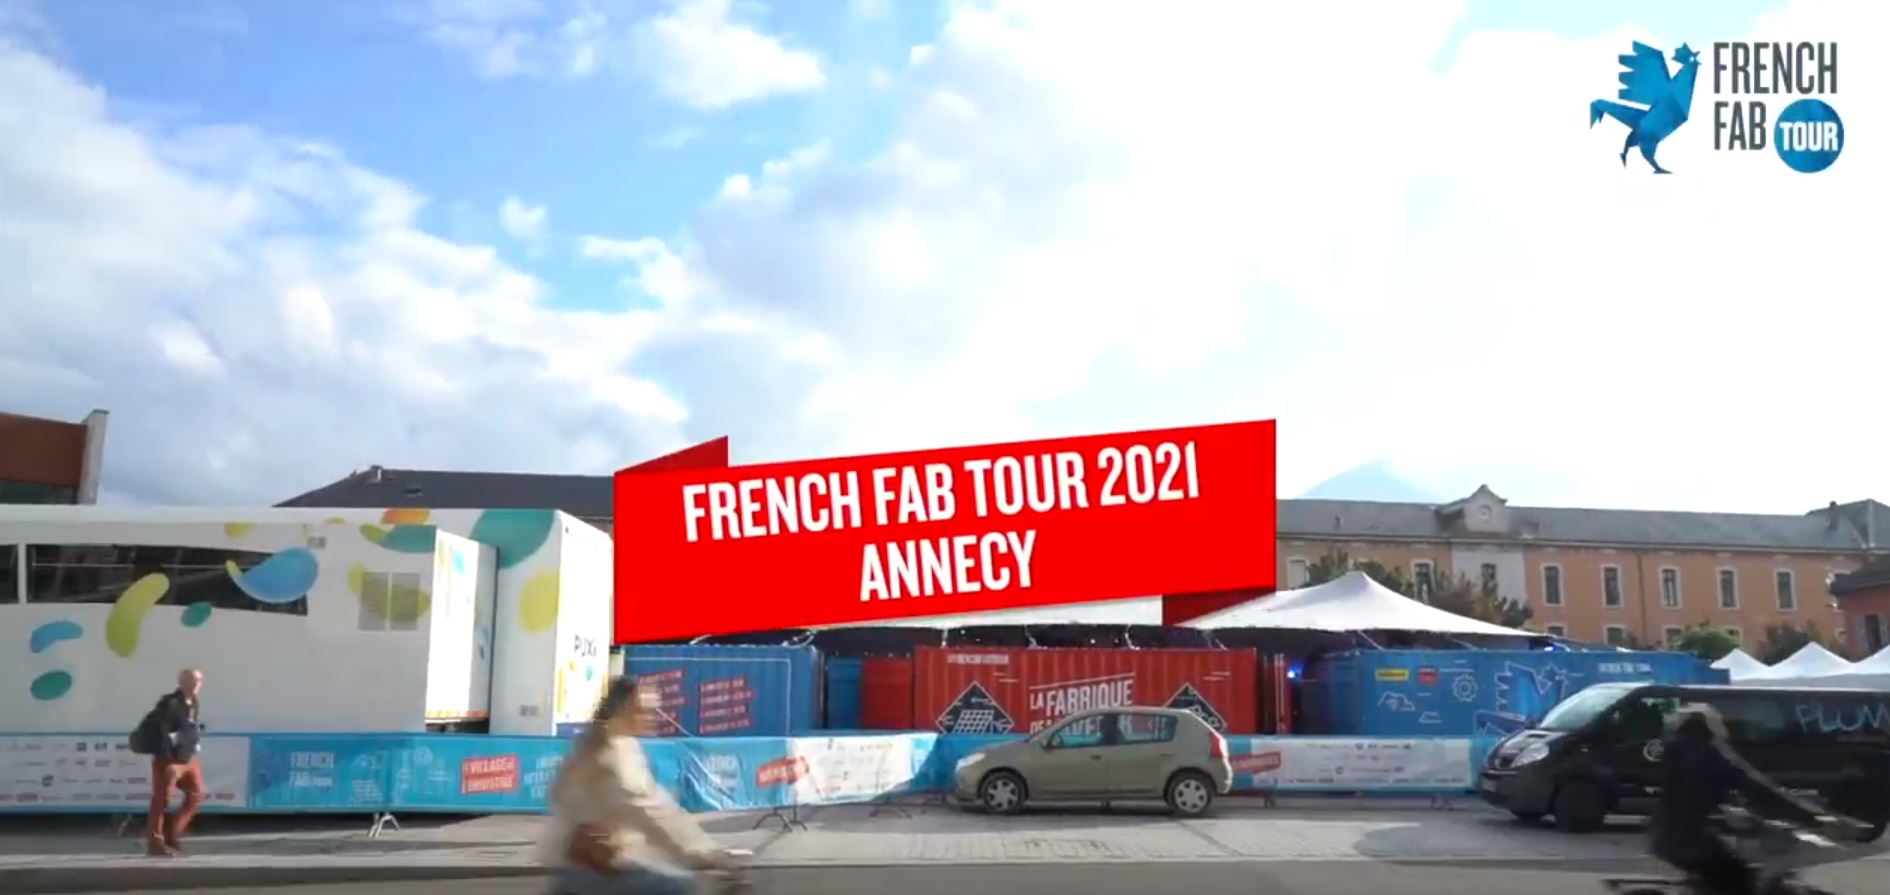 The French Fab in Annecy (France) on October 13, 2021 - MGA Technologies was Present